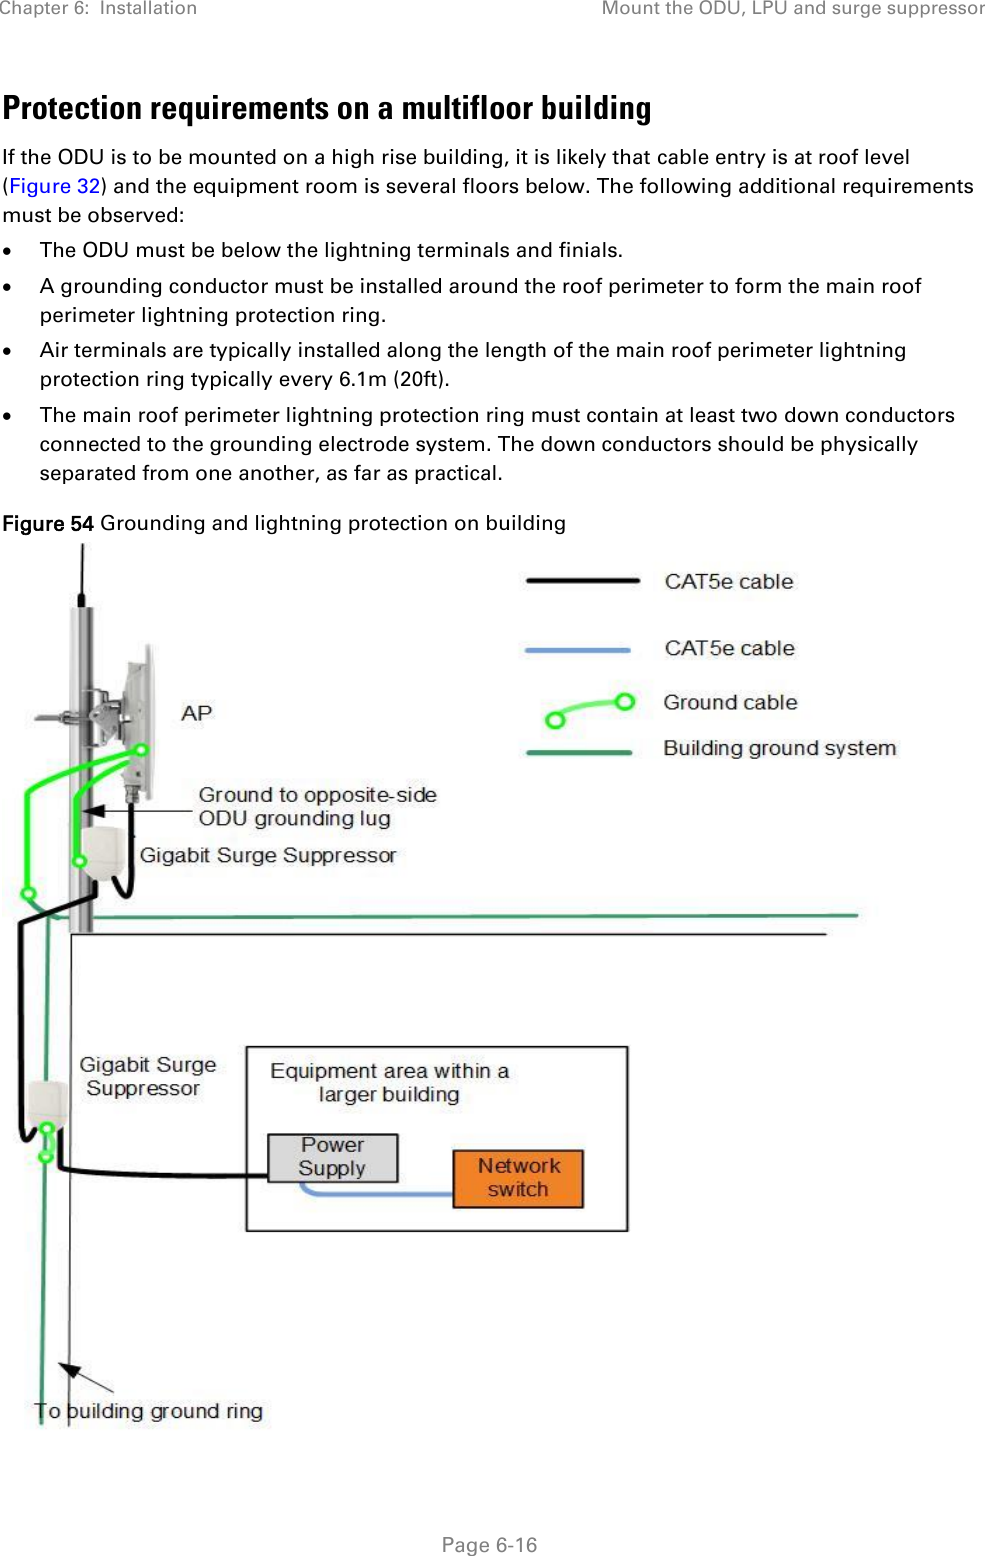 Chapter 6:  Installation Mount the ODU, LPU and surge suppressor   Page 6-16 Protection requirements on a multifloor building If the ODU is to be mounted on a high rise building, it is likely that cable entry is at roof level (Figure 32) and the equipment room is several floors below. The following additional requirements must be observed:  The ODU must be below the lightning terminals and finials.  A grounding conductor must be installed around the roof perimeter to form the main roof perimeter lightning protection ring.  Air terminals are typically installed along the length of the main roof perimeter lightning protection ring typically every 6.1m (20ft).  The main roof perimeter lightning protection ring must contain at least two down conductors connected to the grounding electrode system. The down conductors should be physically separated from one another, as far as practical. Figure 54 Grounding and lightning protection on building  